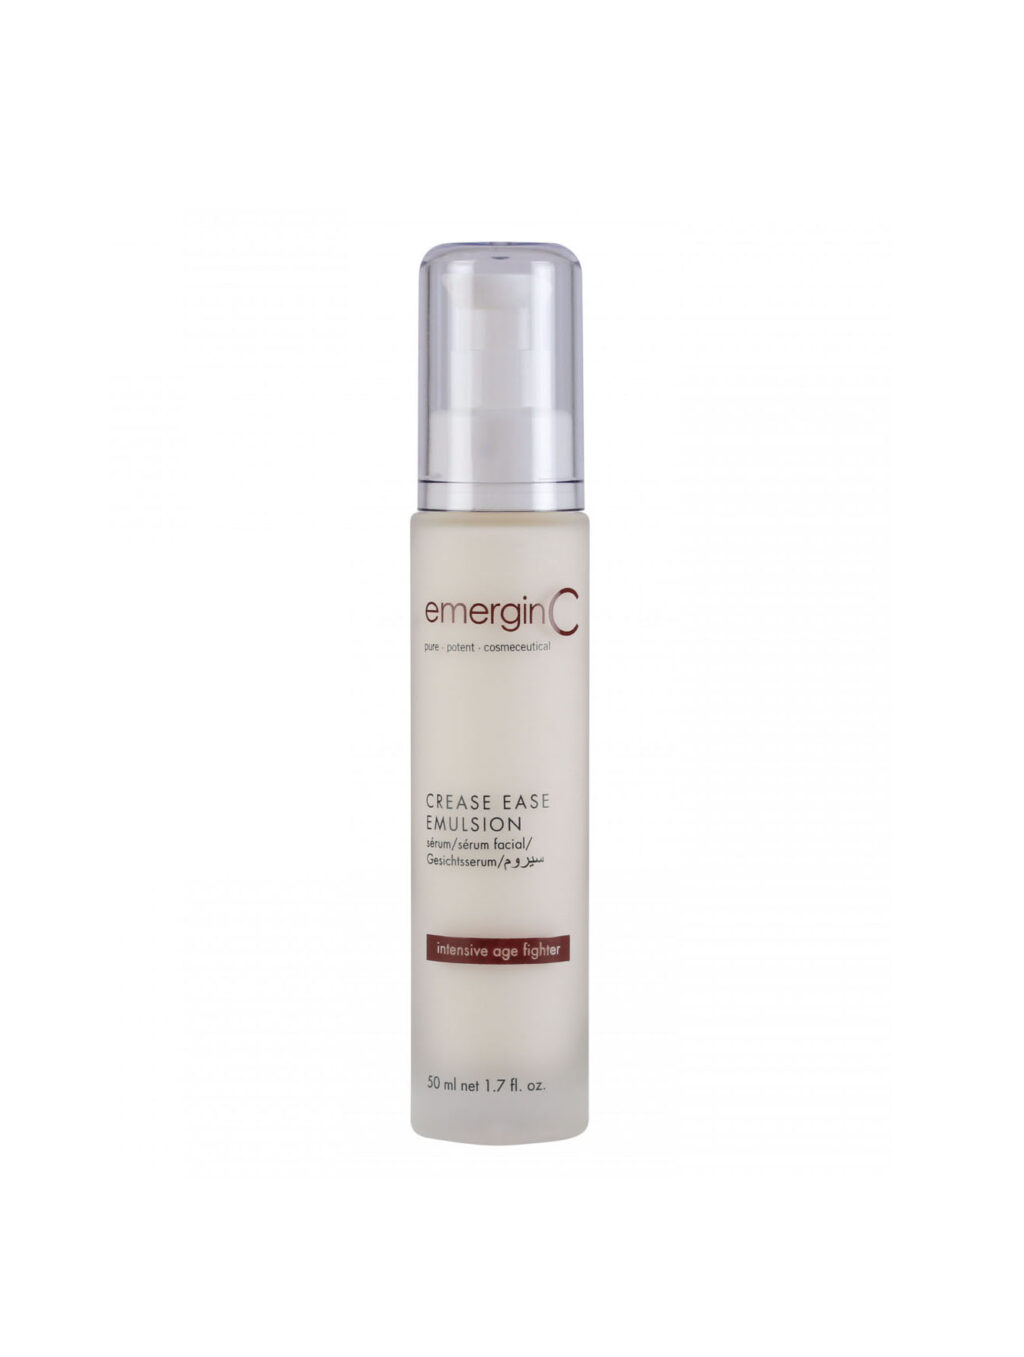 A bottle of emerginc Crease Ease Emulsion, labeled as an "intensive age fighter" skincare product.